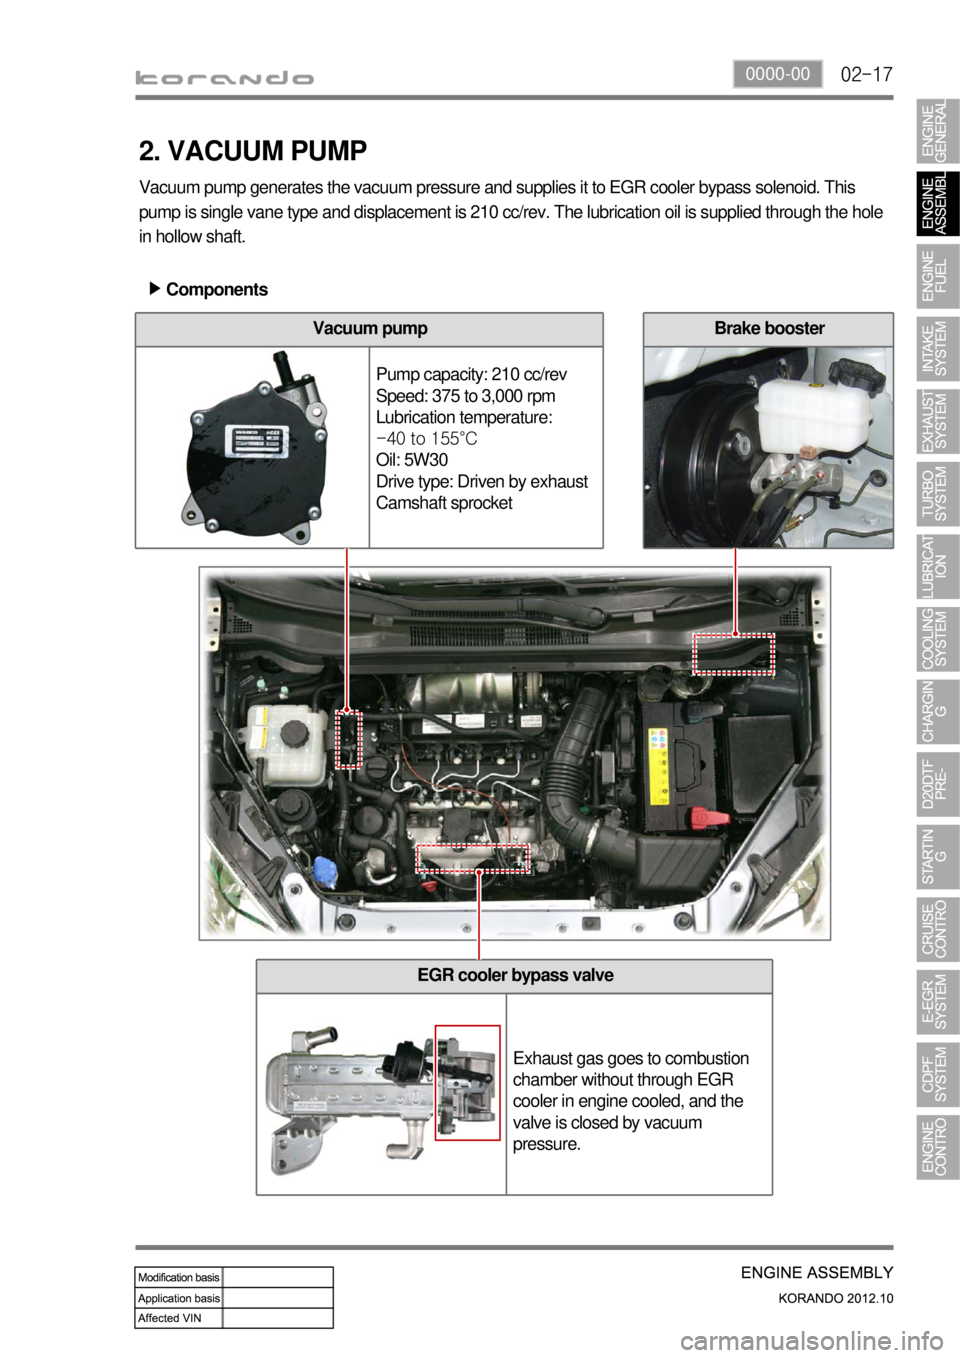 SSANGYONG KORANDO 2012  Service Manual 02-170000-00
EGR cooler bypass valve
Exhaust gas goes to combustion 
chamber without through EGR 
cooler in engine cooled, and the 
valve is closed by vacuum 
pressure.
2. VACUUM PUMP
Vacuum pump gene